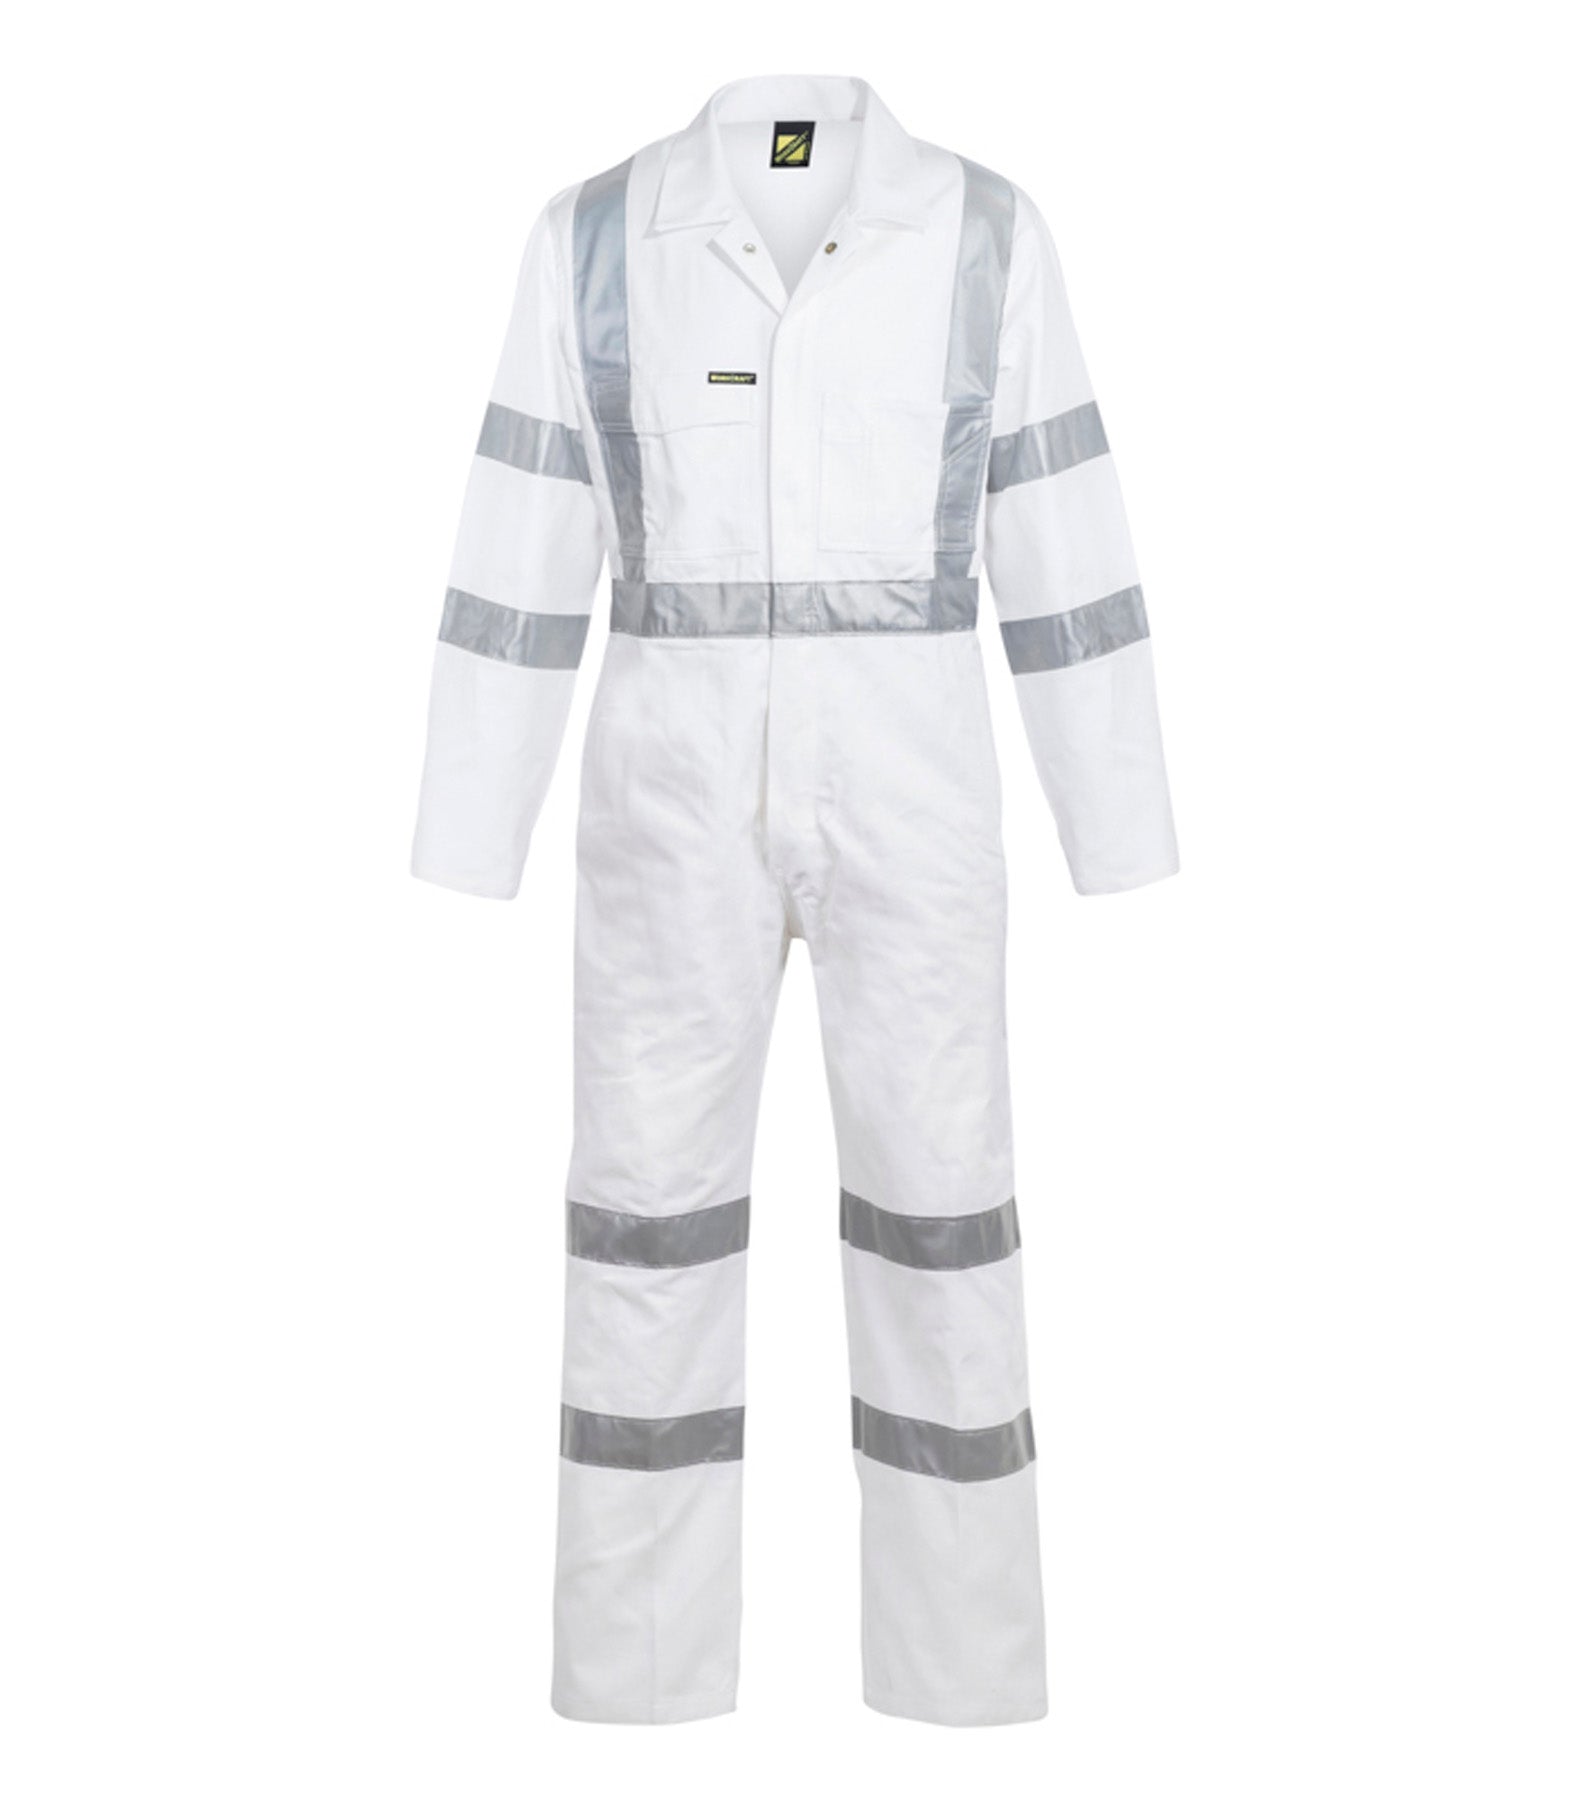 Night White 310 Gsm Cotton Coveralls Reflective Tape - made by Workcraft